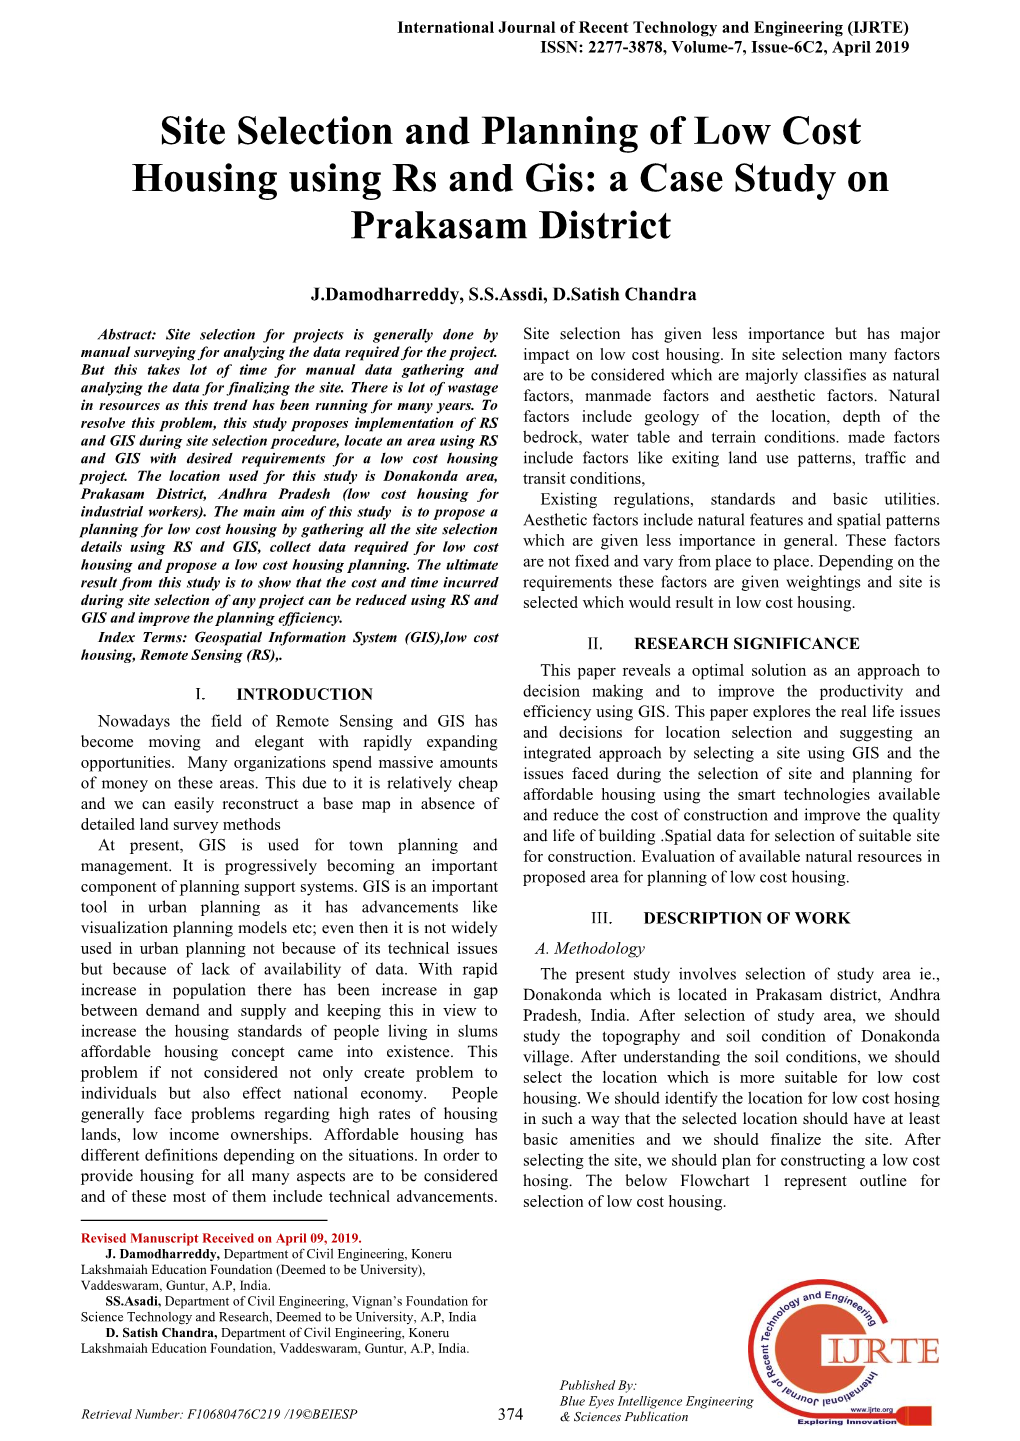 Site Selection and Planning of Low Cost Housing Using Rs and Gis: a Case Study on Prakasam District